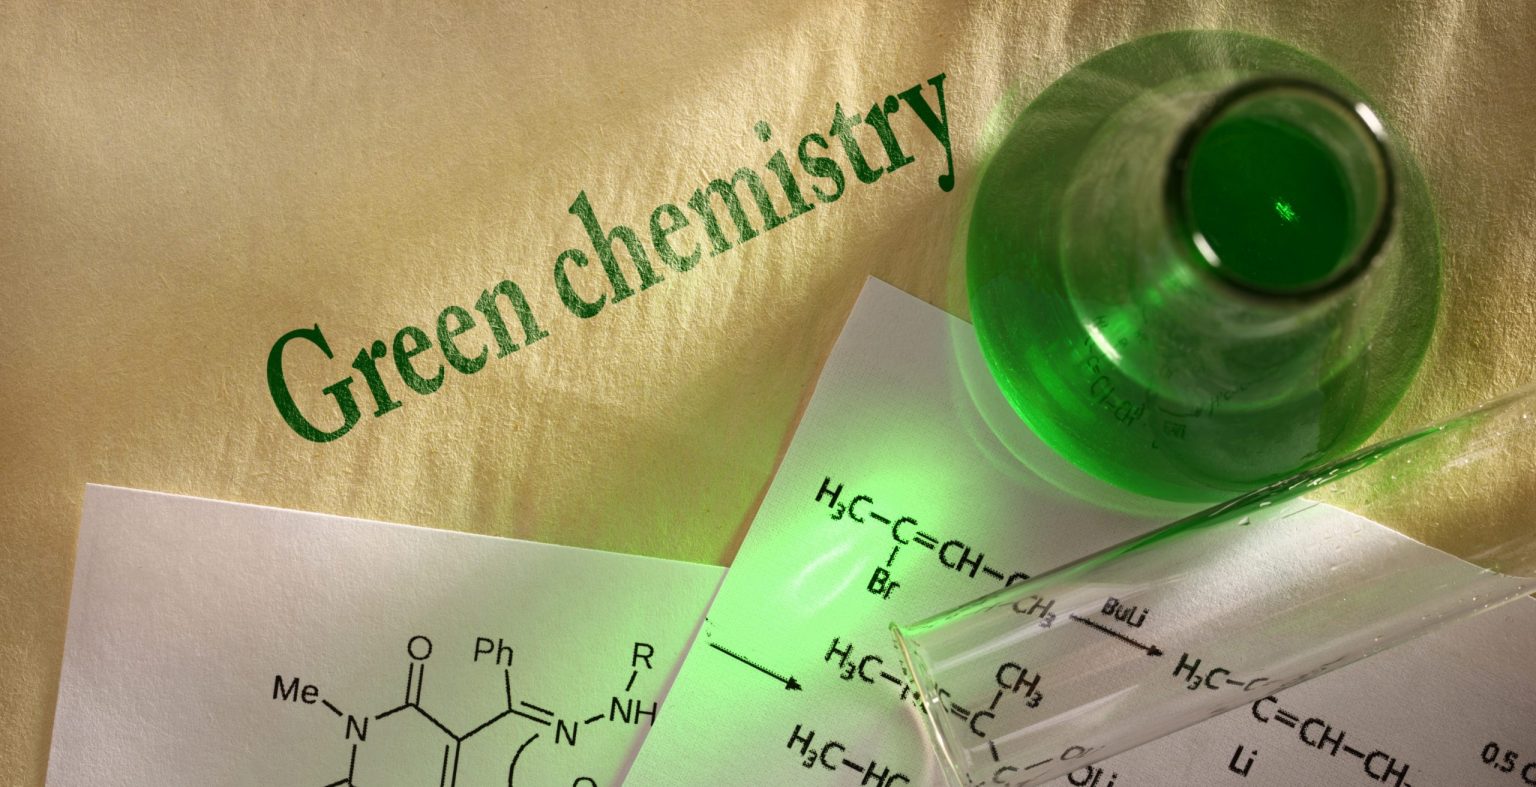 green chemistry research topics for undergraduates